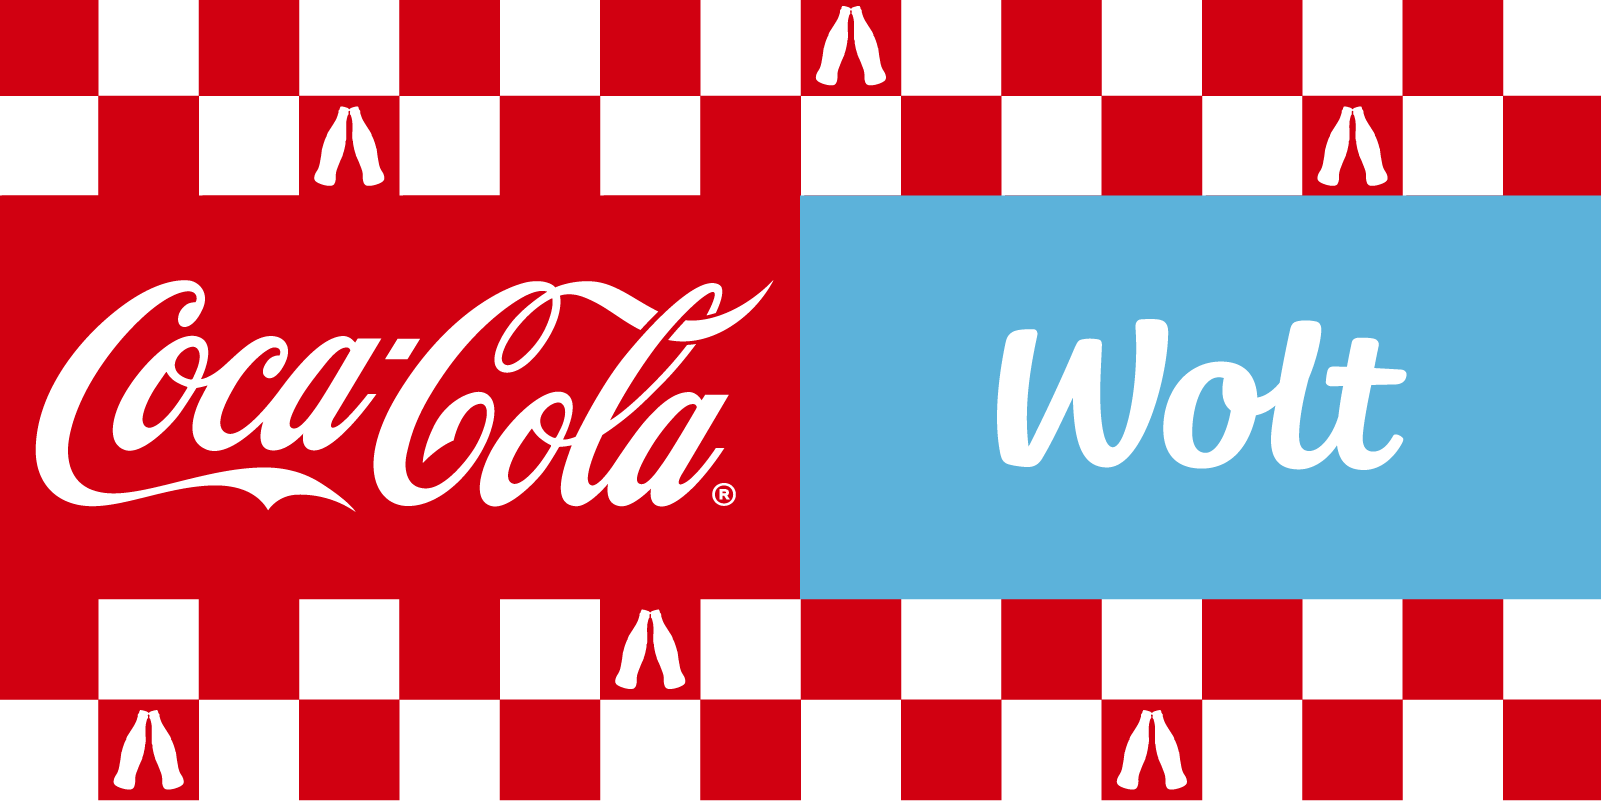 coca-cola and wolt